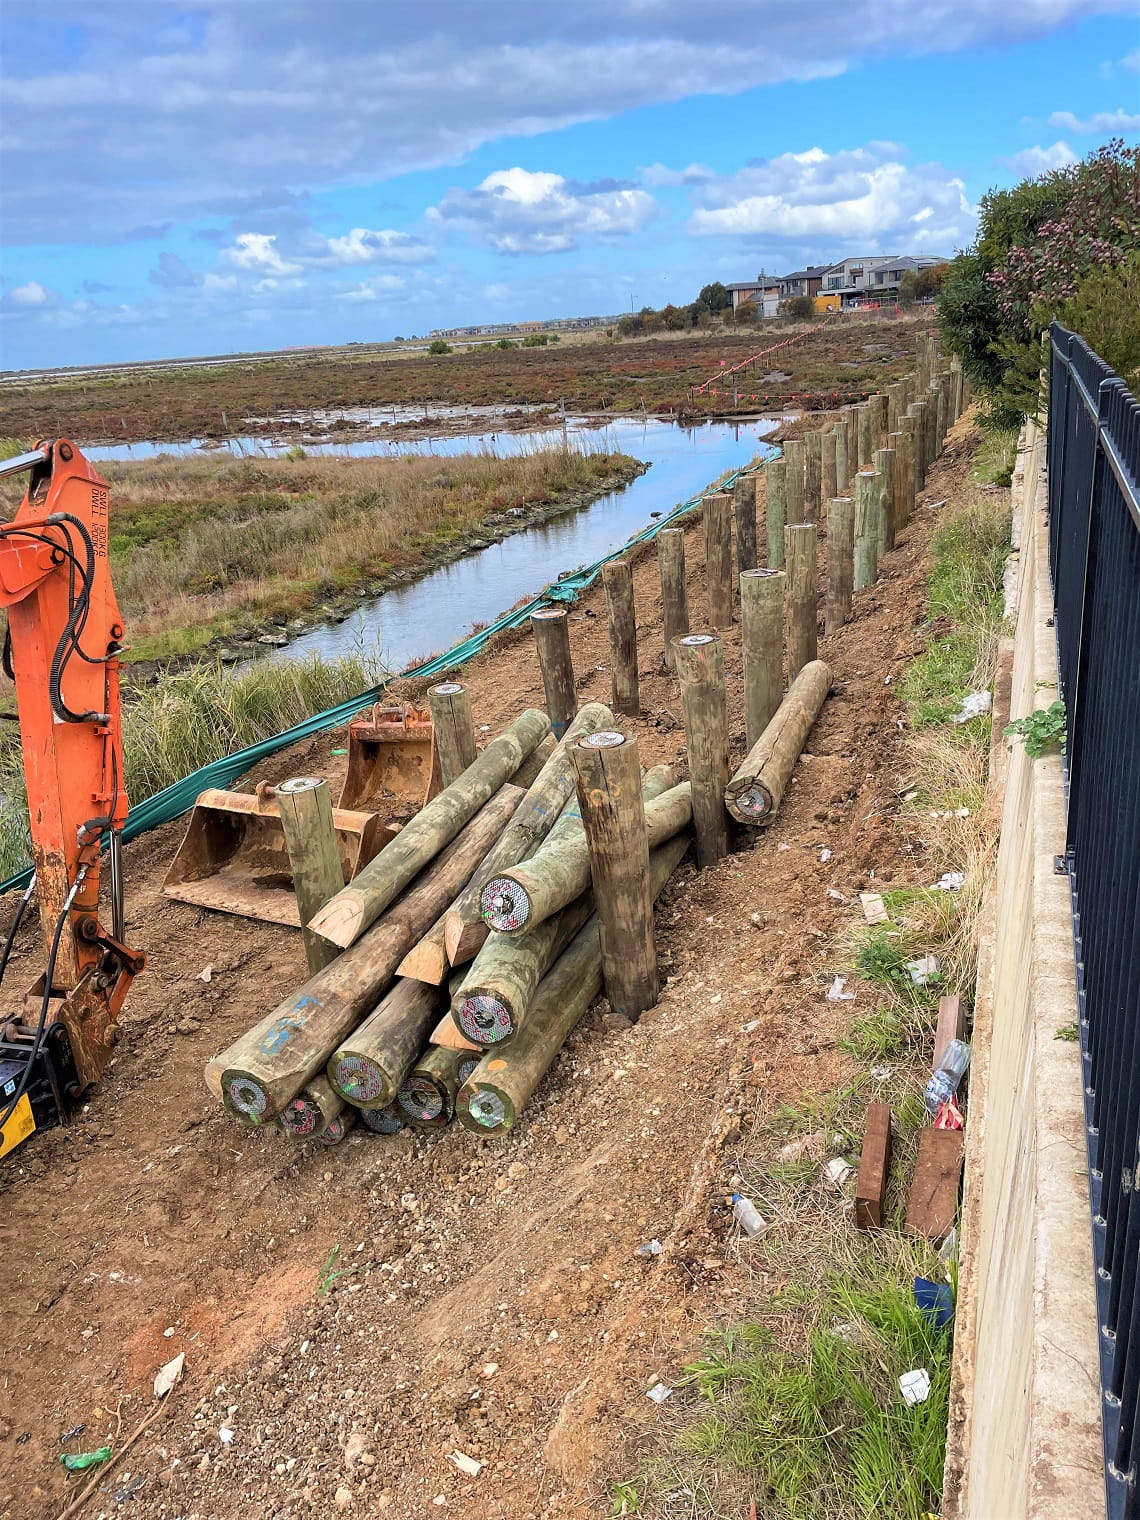 Works to construct the missing link in the Bay Trail have started, with driven piling works underway.